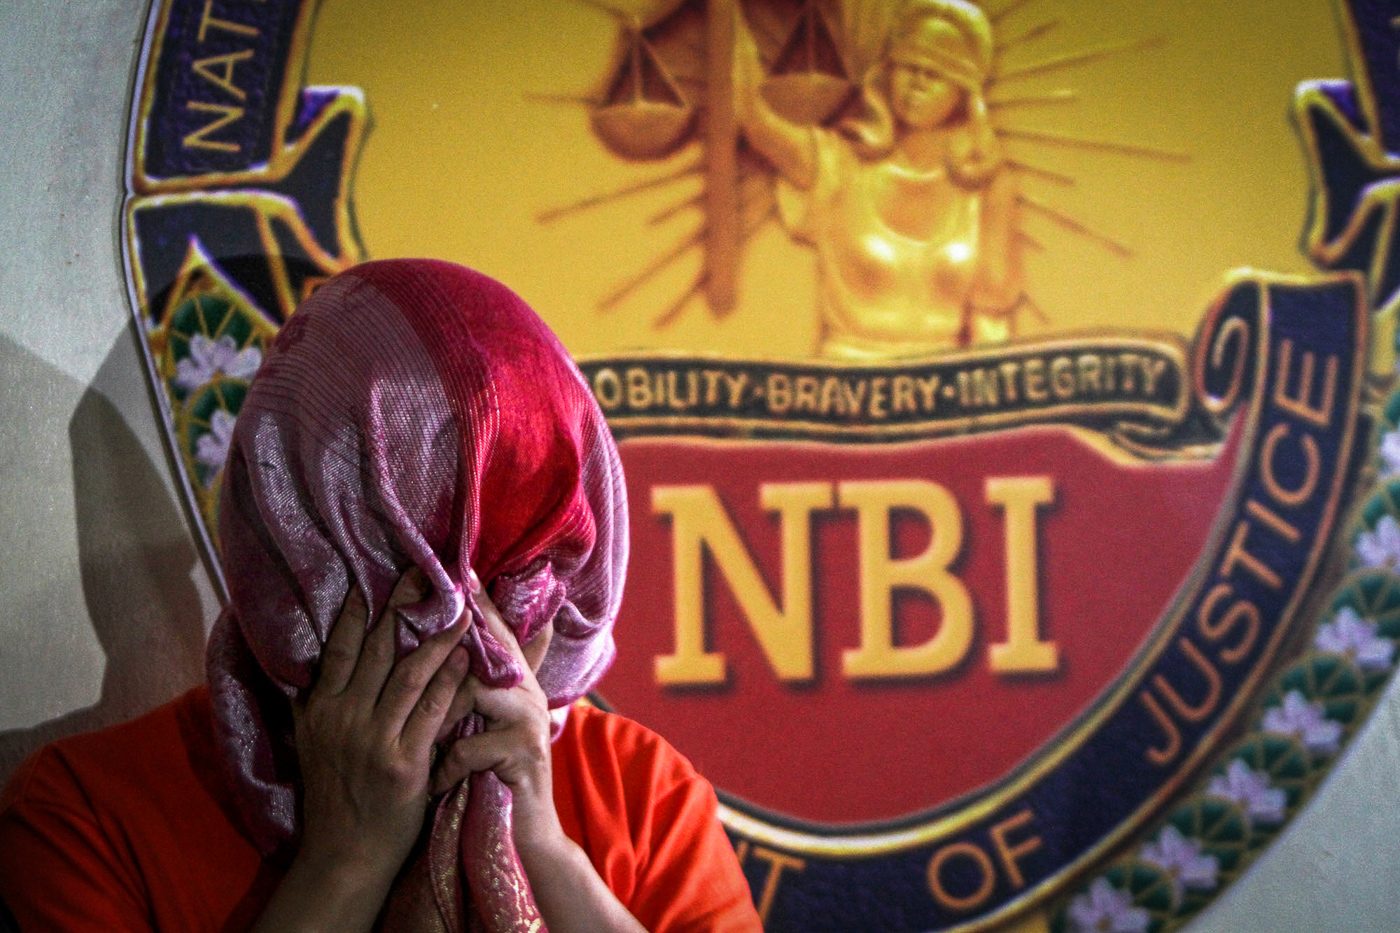 CAUGHT. Members of the NBI-Anti Fraud Division on July 21, 2017, present to media Maria Victoria Lopez, head of Metrobank's Corporate Service Management unit, after her arrest for alleged fraud amounting to at least P900 million. Photo by Inoue Jaena/Rappler   